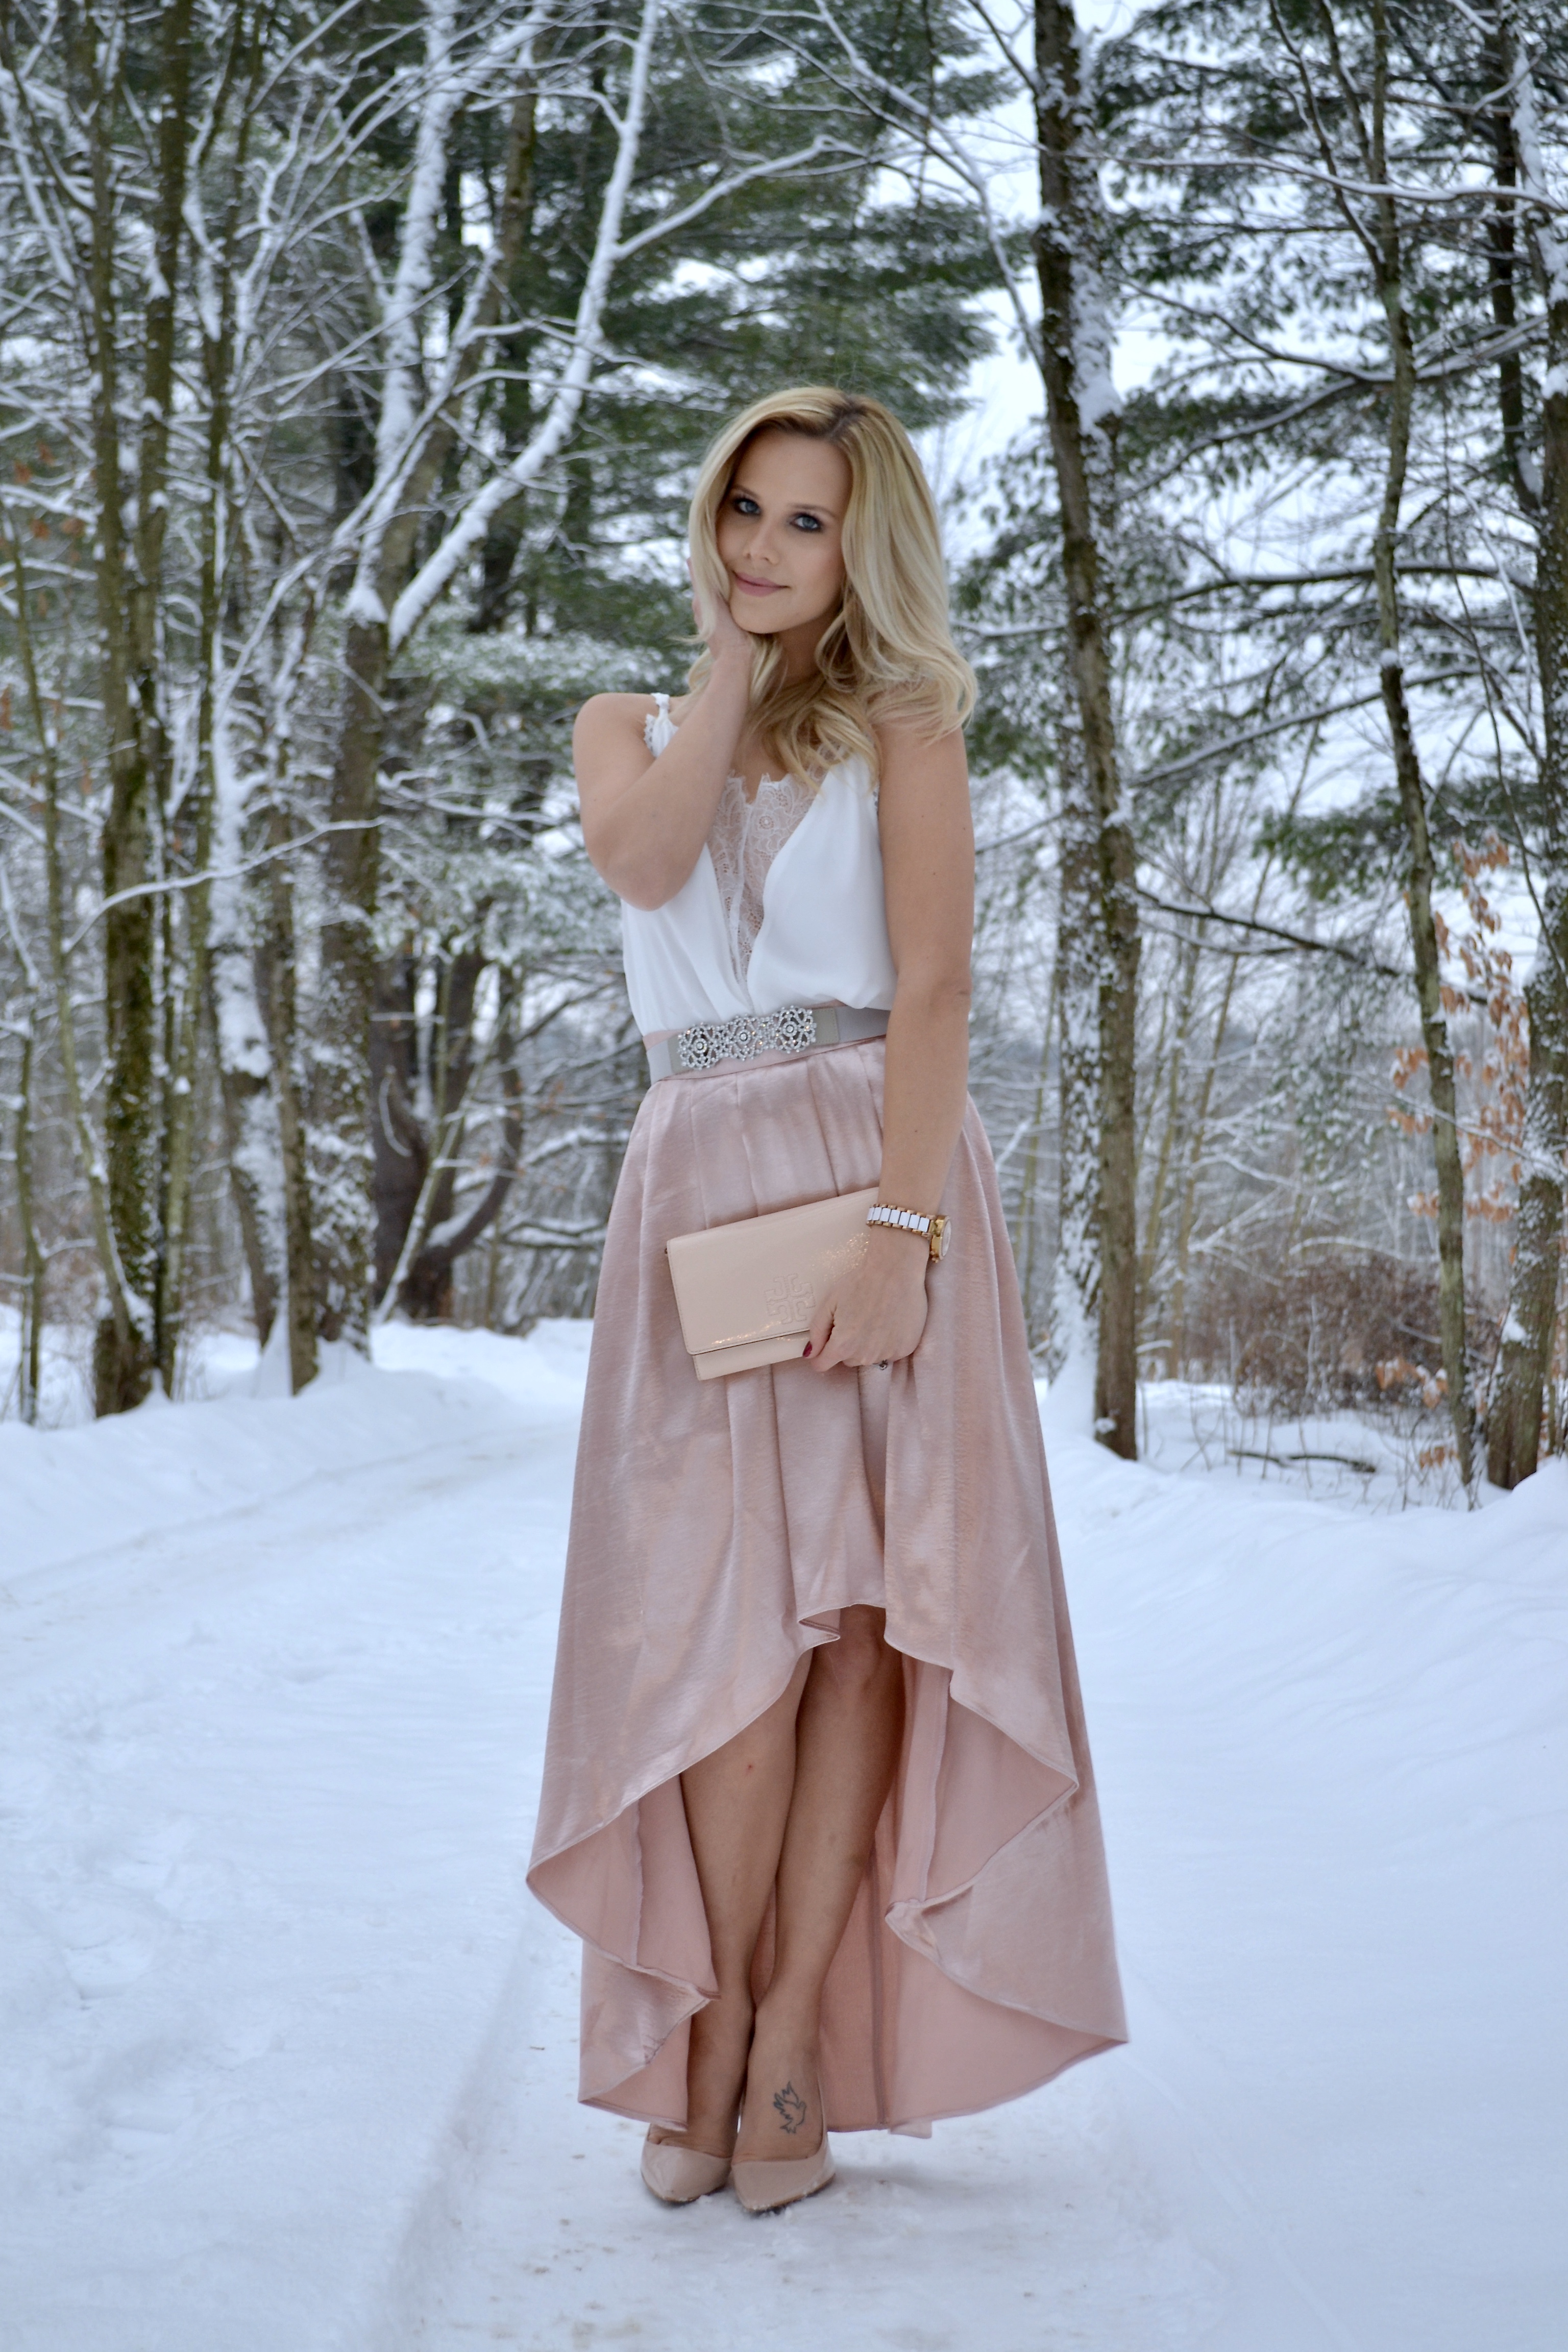 What to Wear This Christmas |Metallic High Low Skirt with White Lace Came and Tory Burch Clutch 